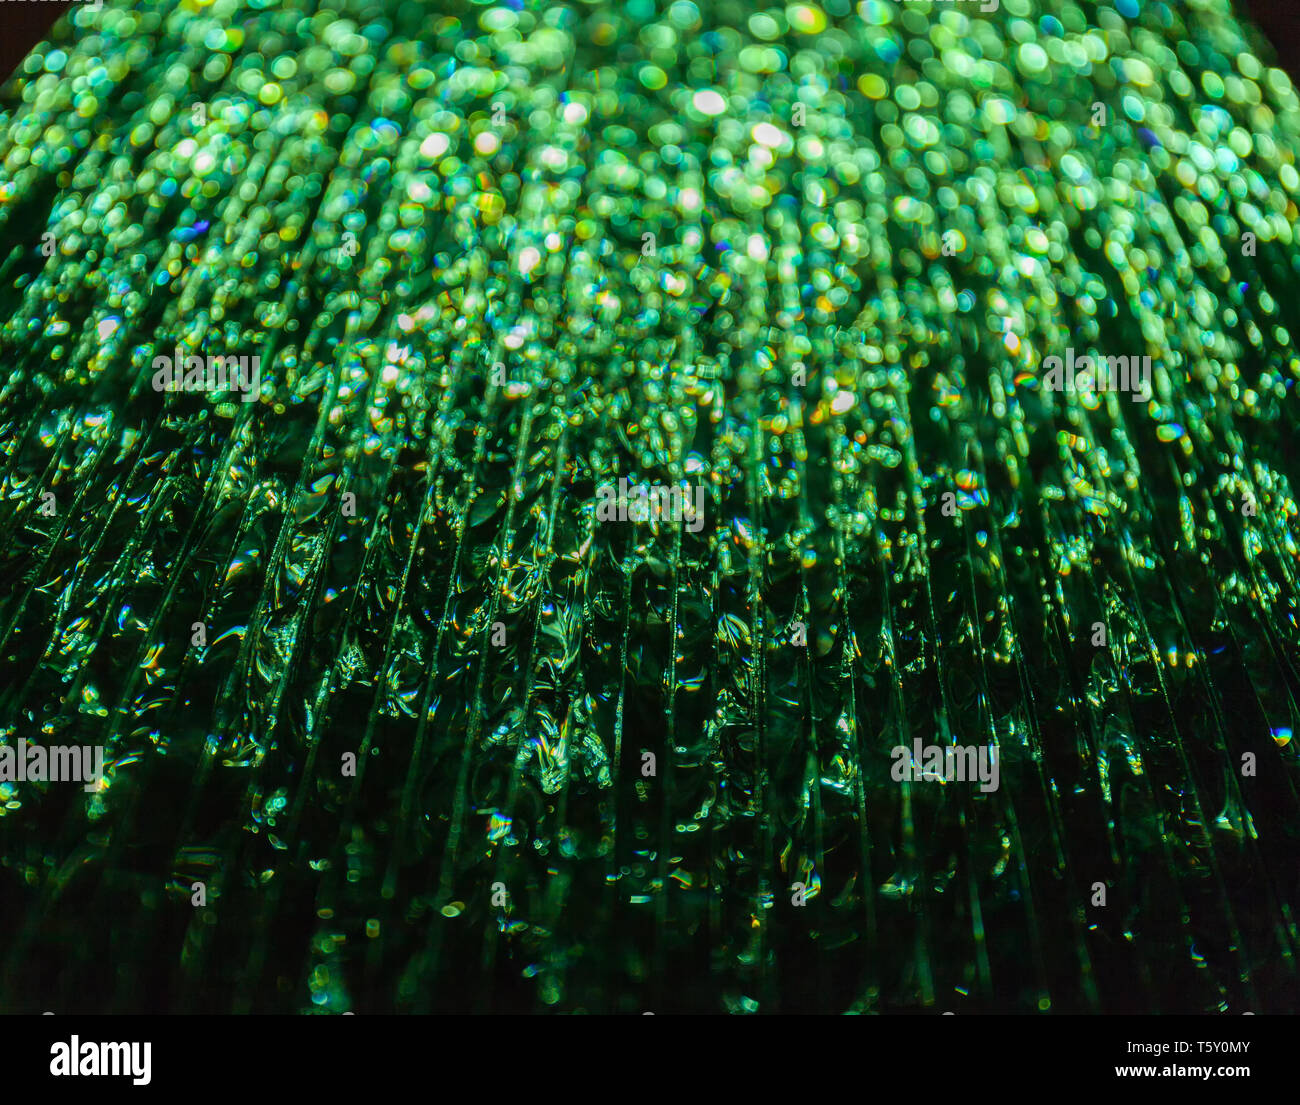 Light passing through a stack of green glass. Abstract background, bokeh Stock Photo